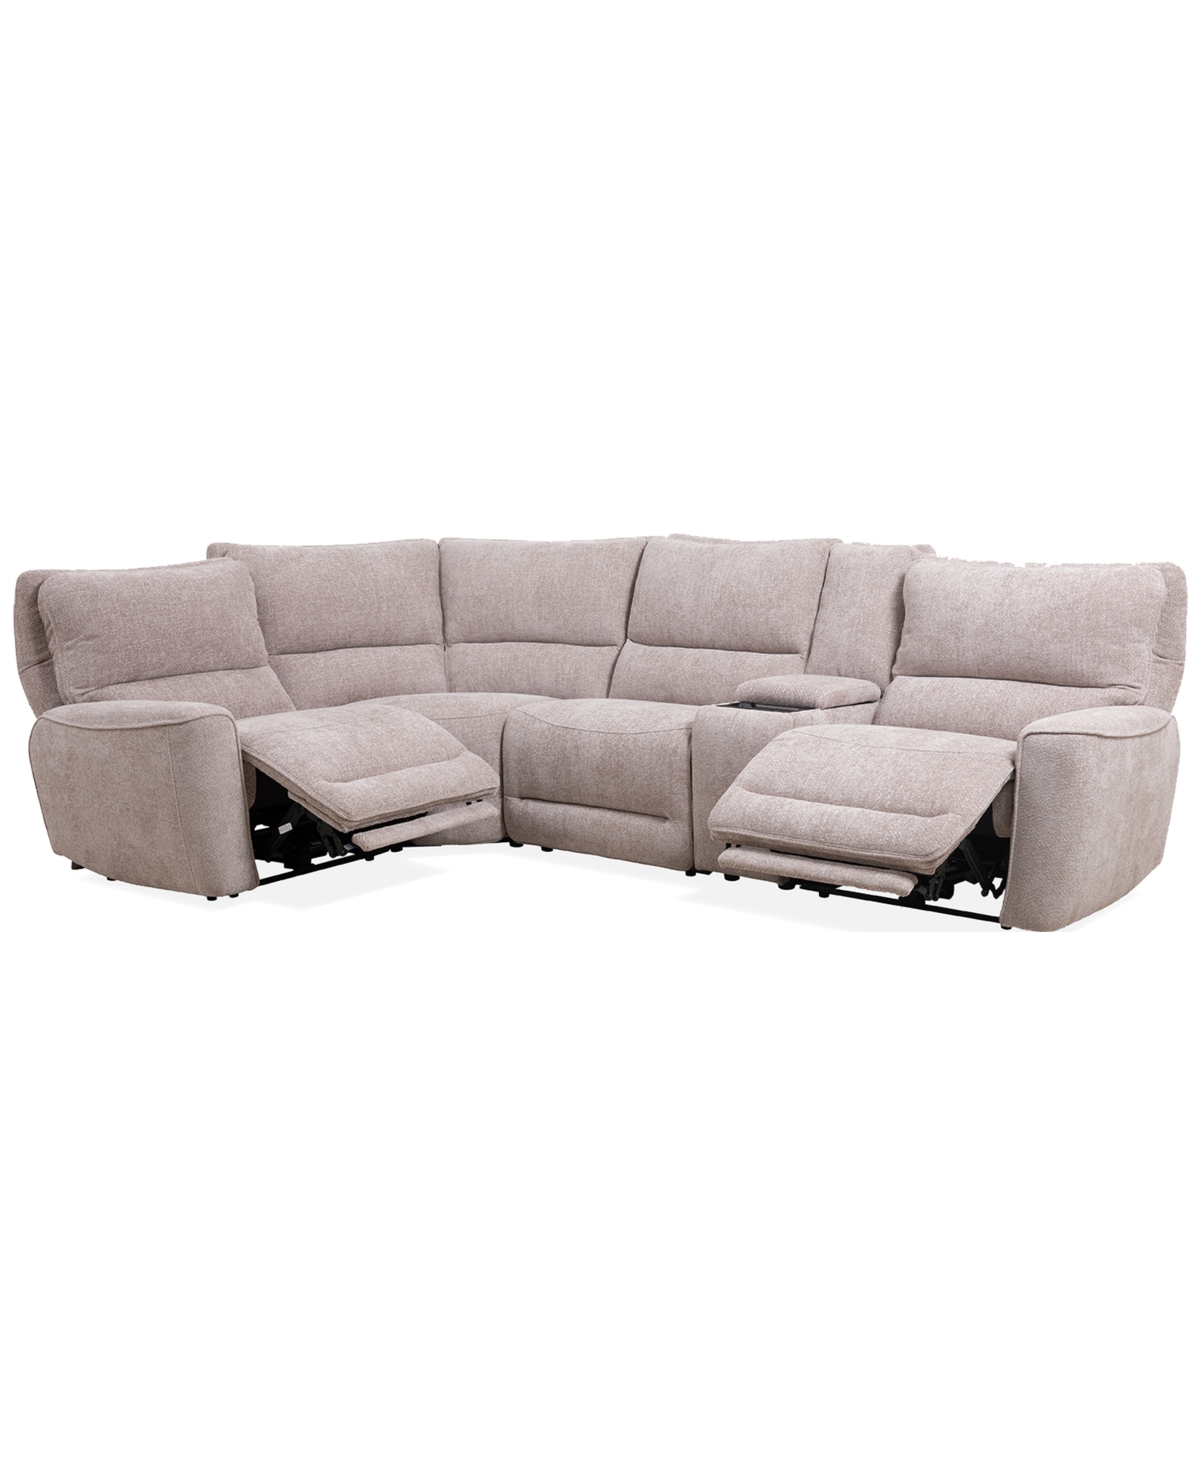 Macy's Deklyn 129" 7-pc. Zero Gravity Fabric Sectional With 3 Power Recliners & 2 Consoles, Created For Mac In Cobblestone